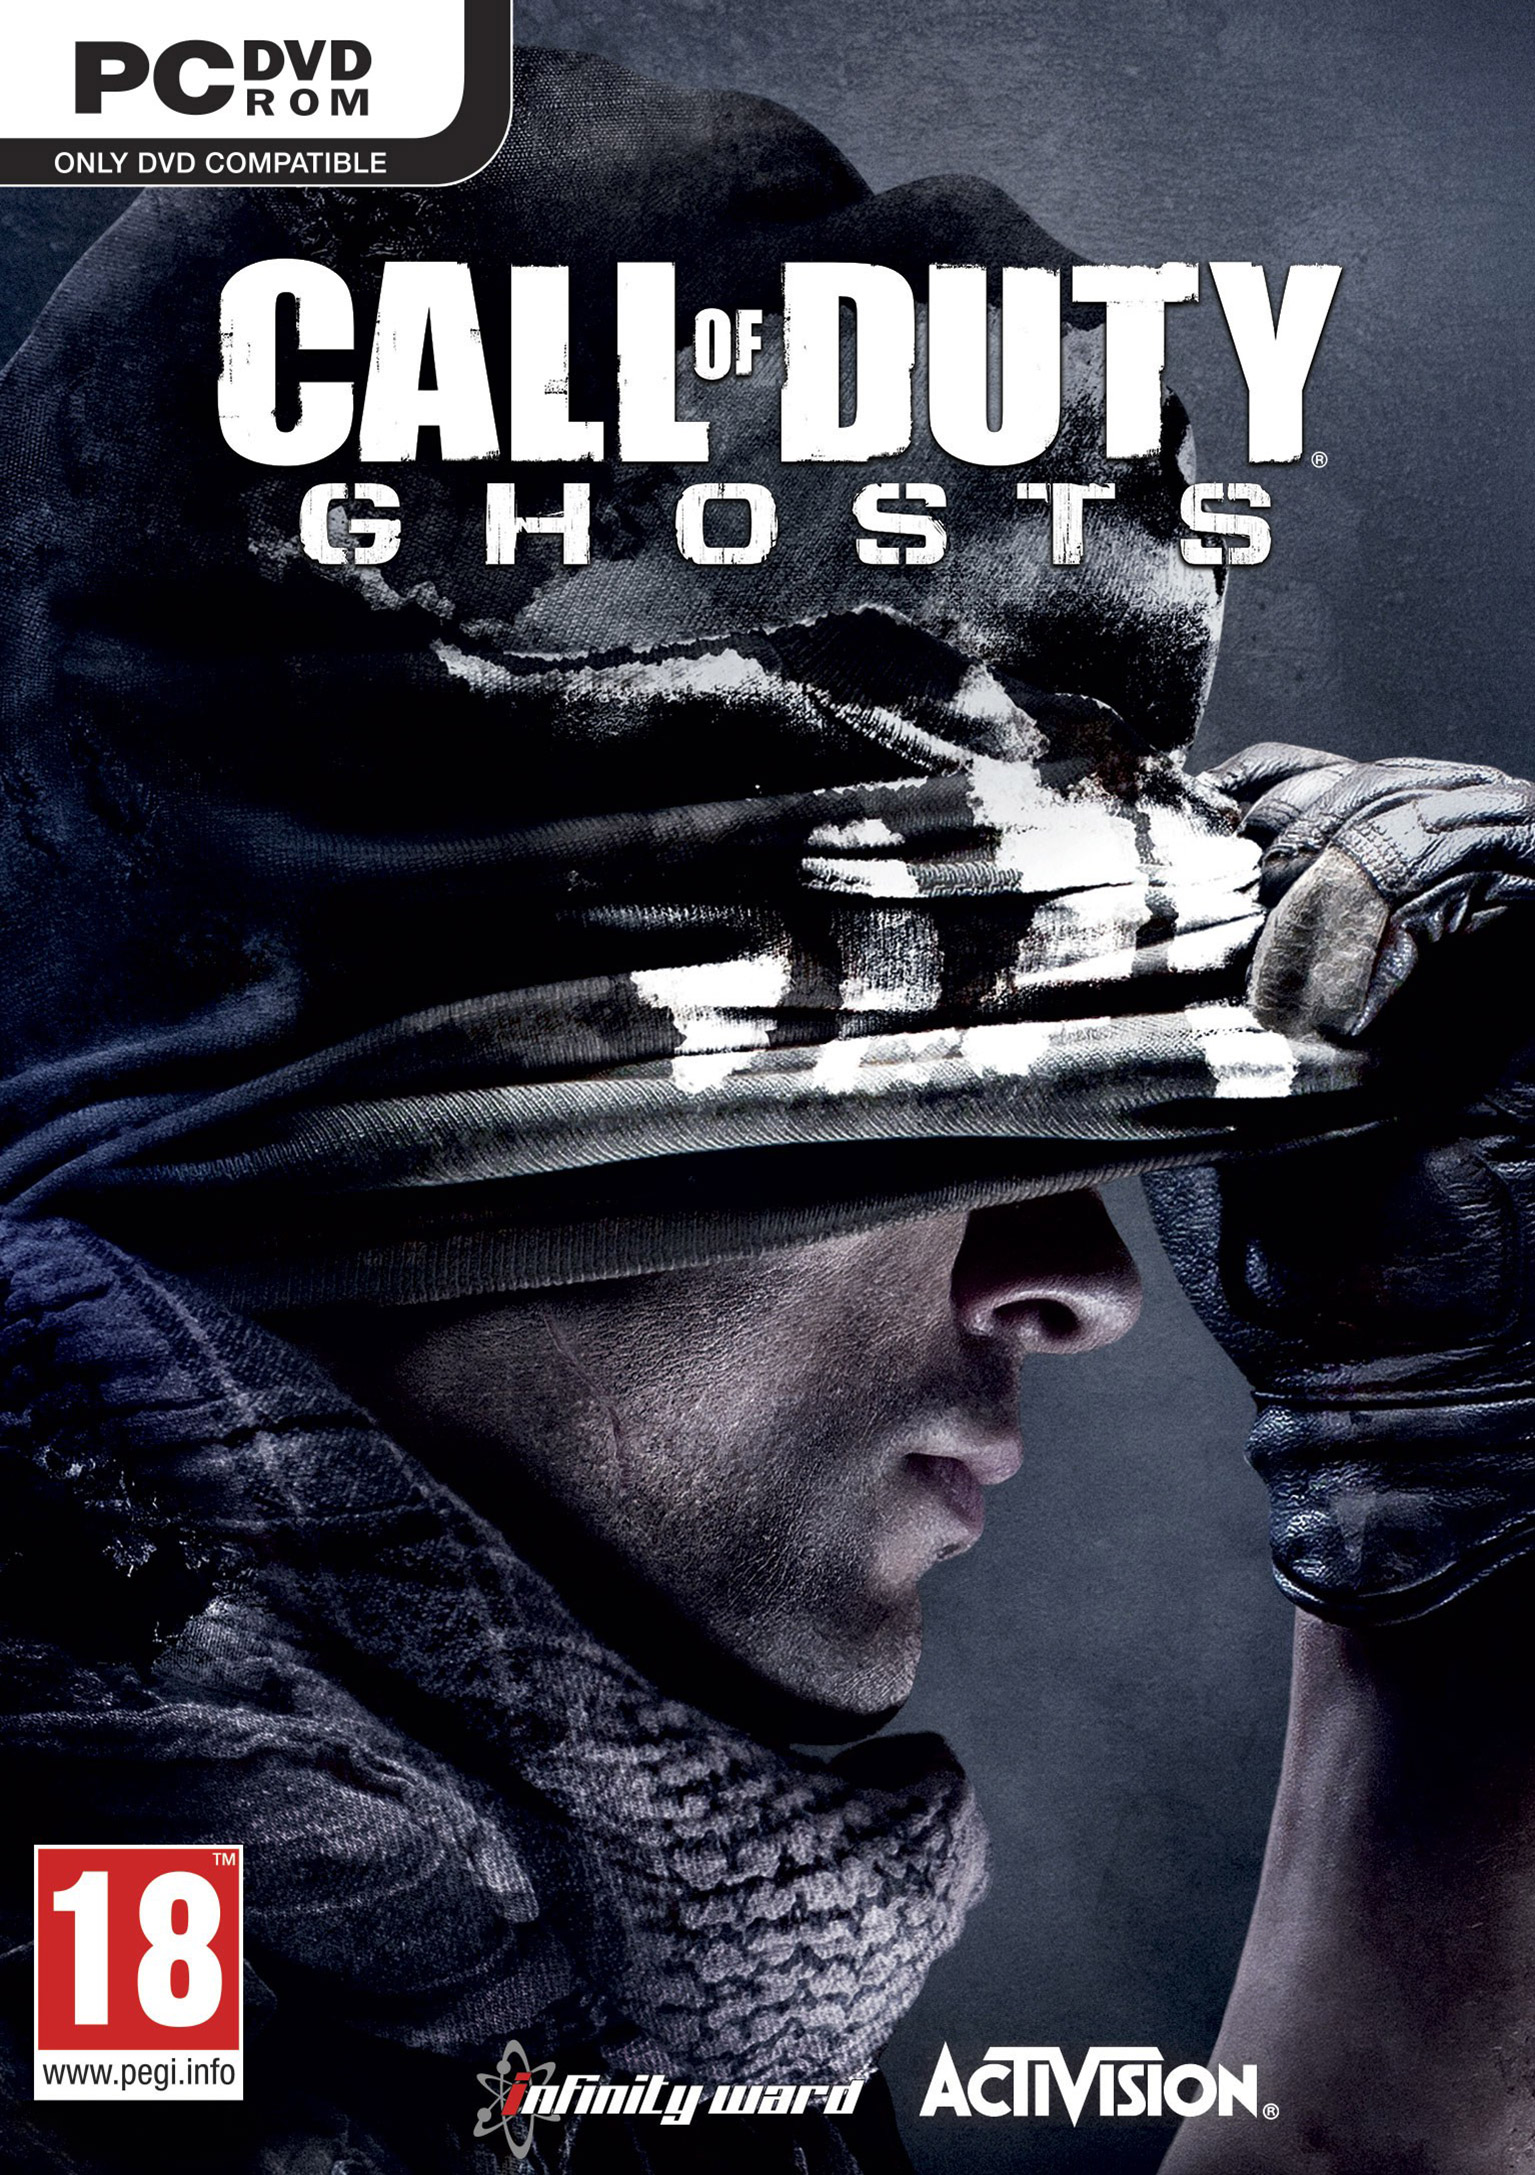 Call of Duty: Ghosts - predn DVD obal